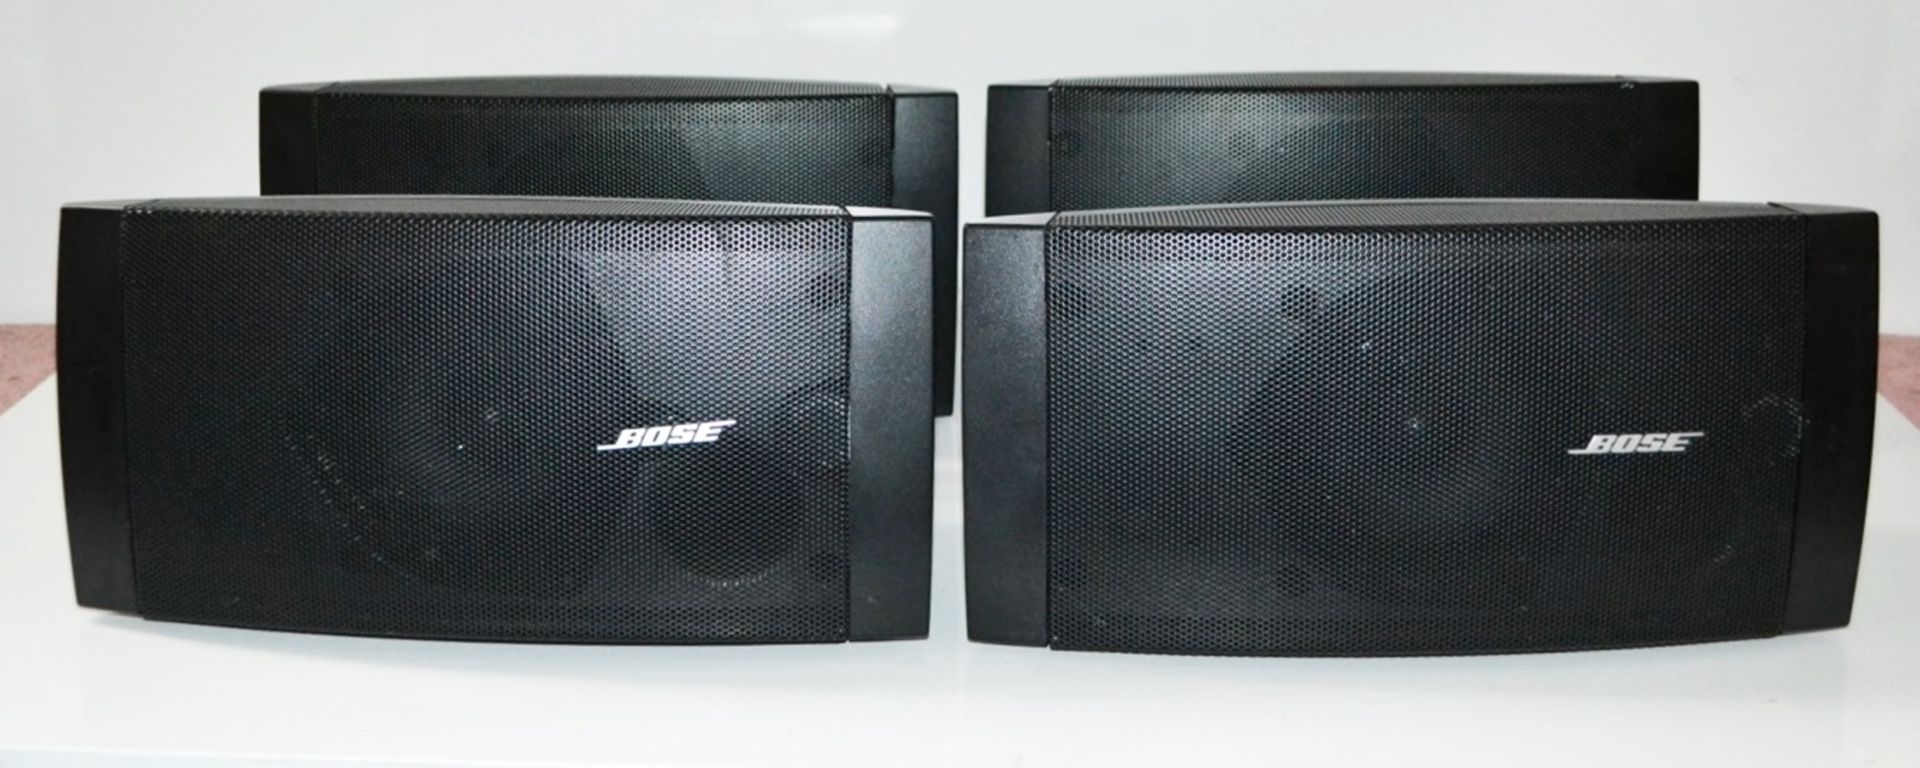 4 x Bose FreeSpace DS 40SE Loudspeakers - Dimensions: 15.9 x 32.6 x 17.5 cm - Recently Removed - Image 2 of 5